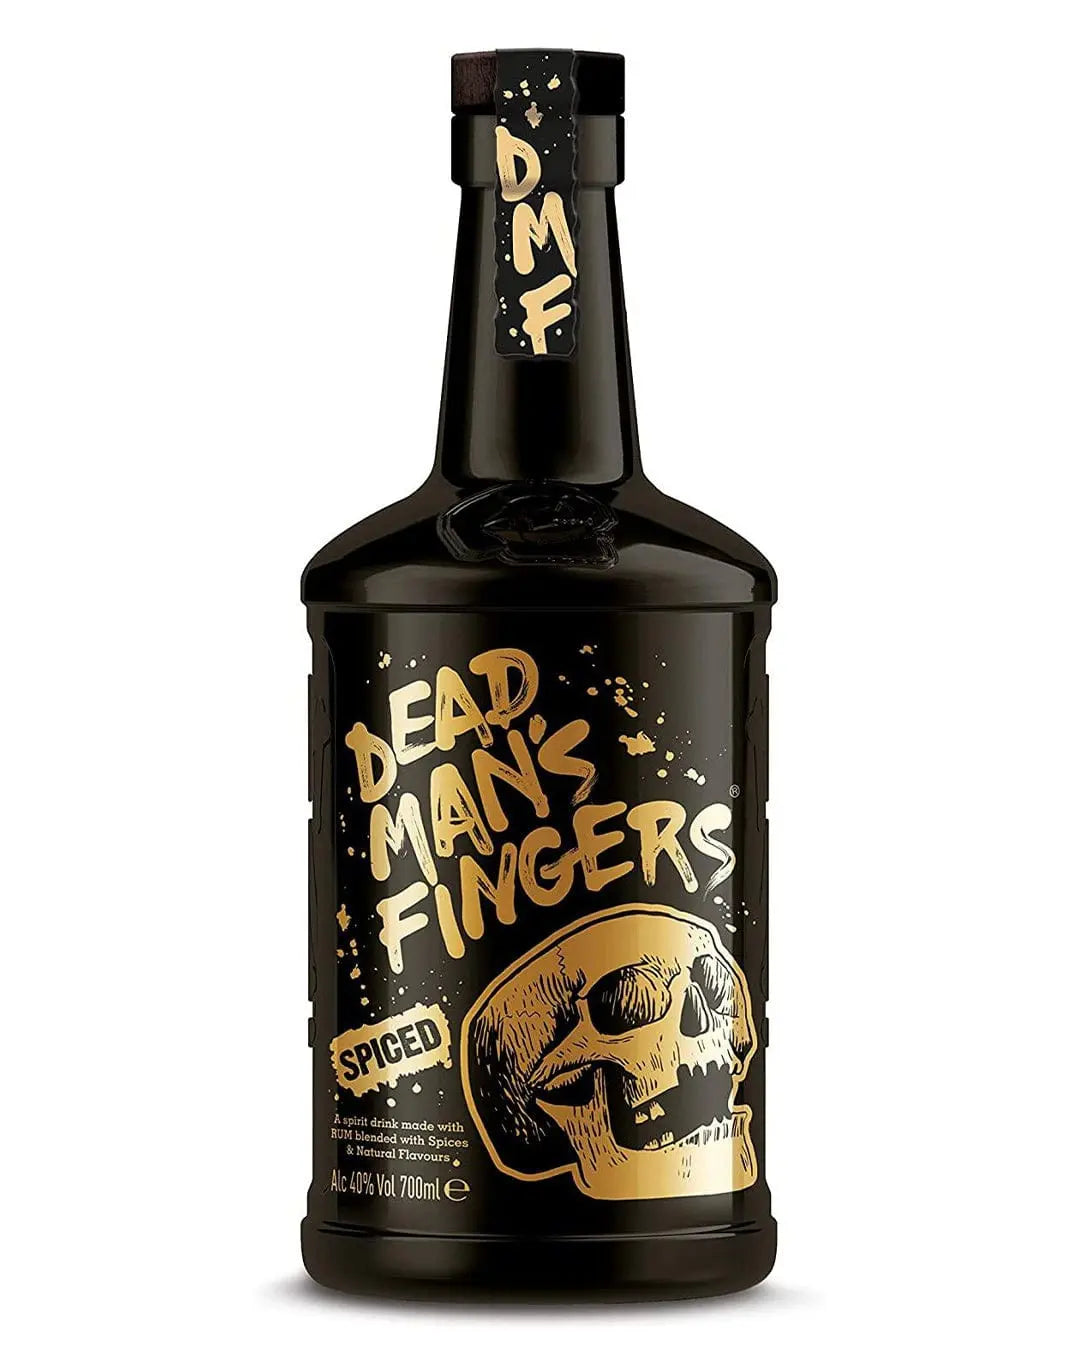 Dead Man's Fingers Limited Edition Christmas Spiced Rum, 70 cl Rum